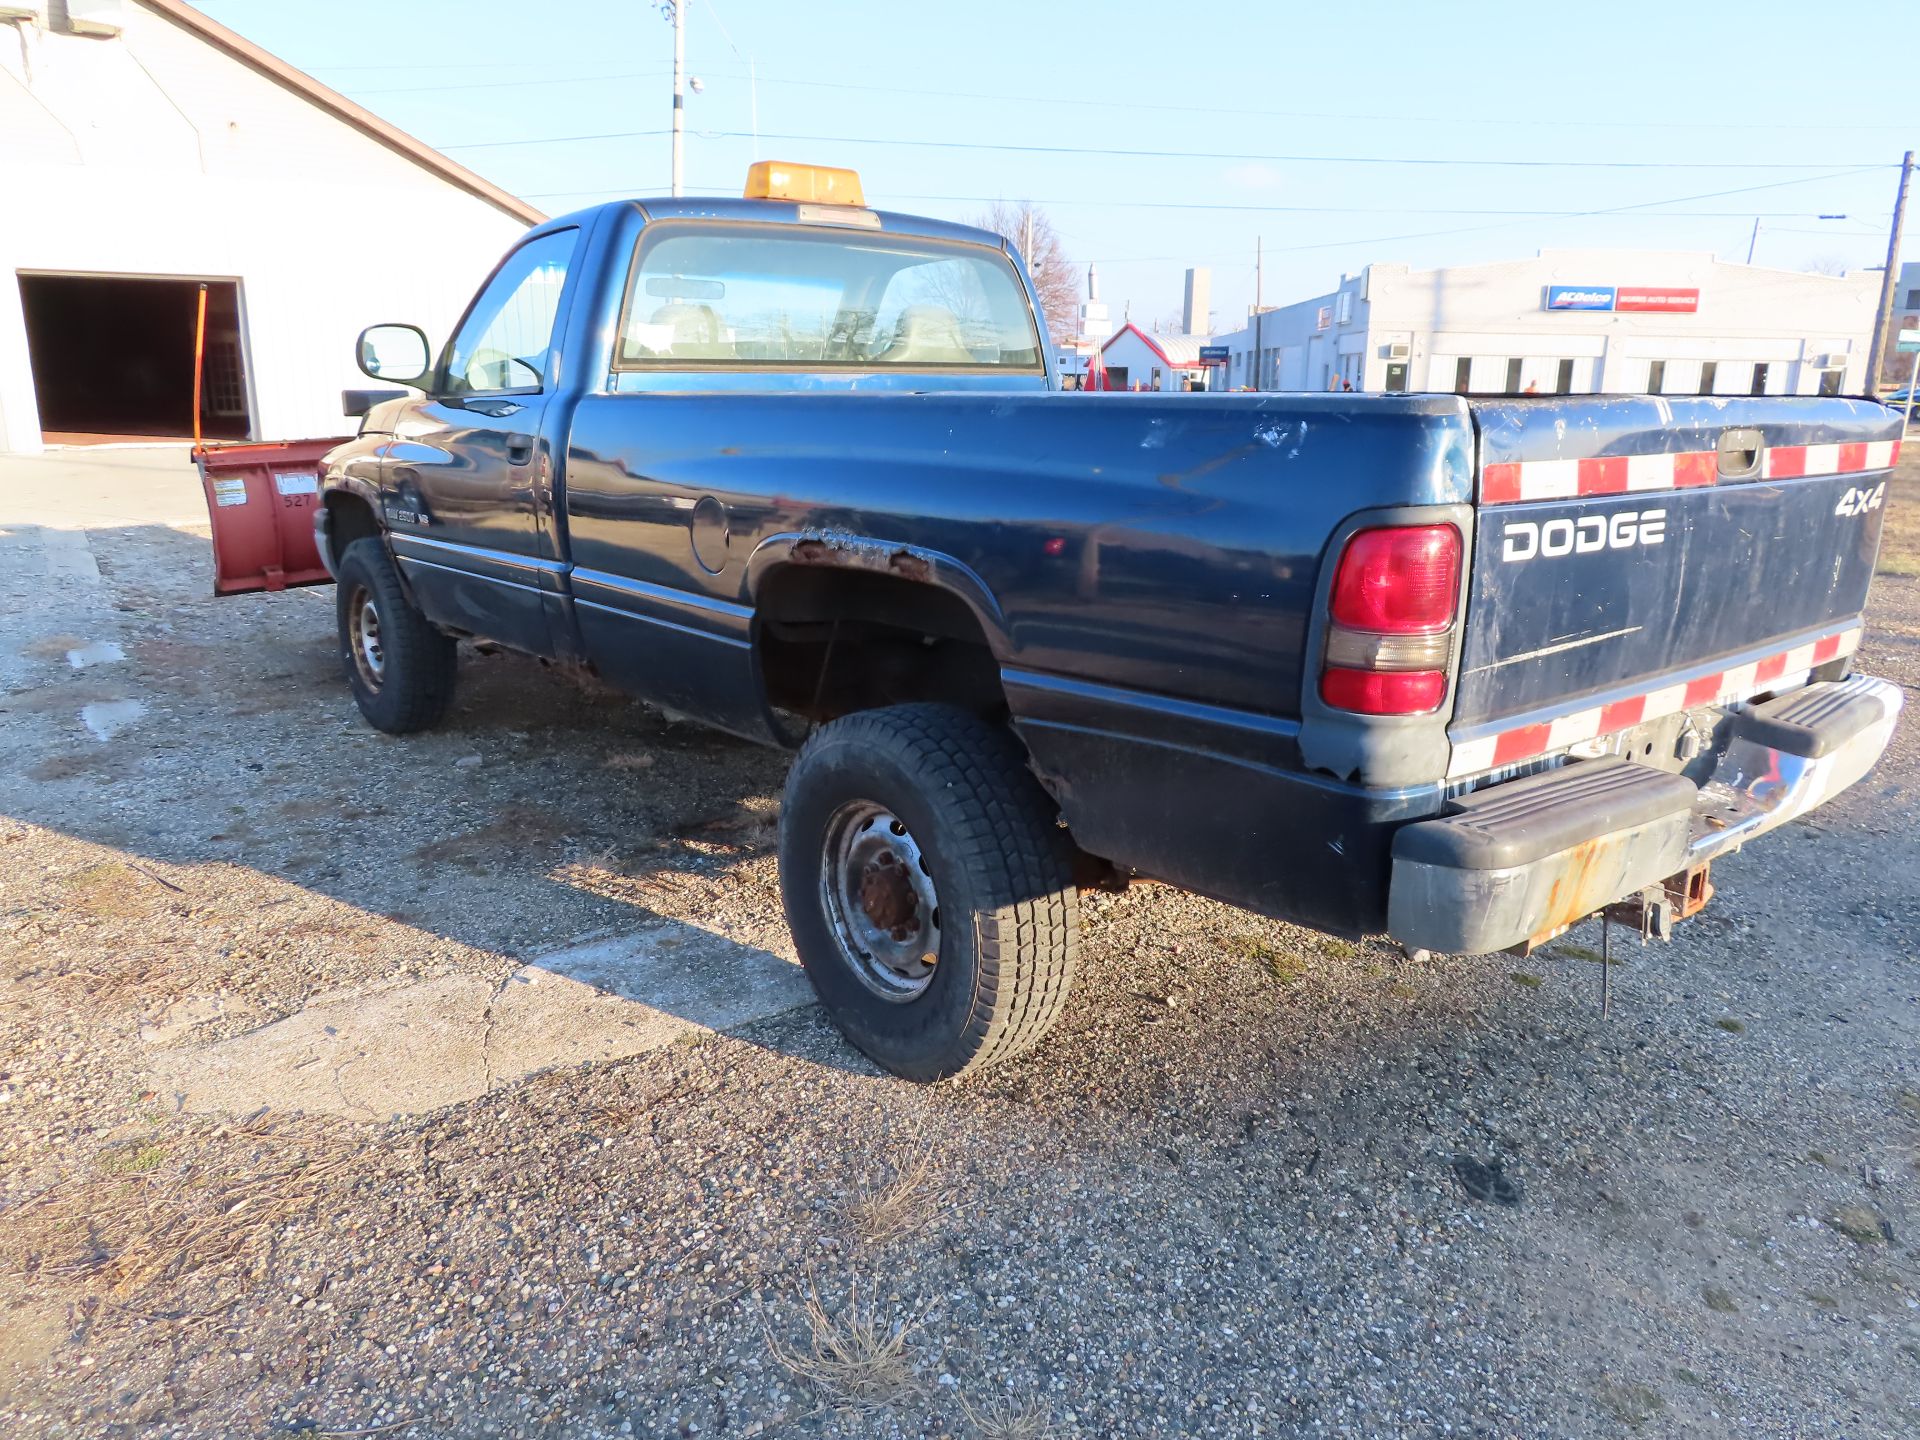 2002 Dodge Ram 2500 plow truck VIN 3B7KF26Z32M309373, 4wd, includes western plow with ultra-mount - Image 4 of 18